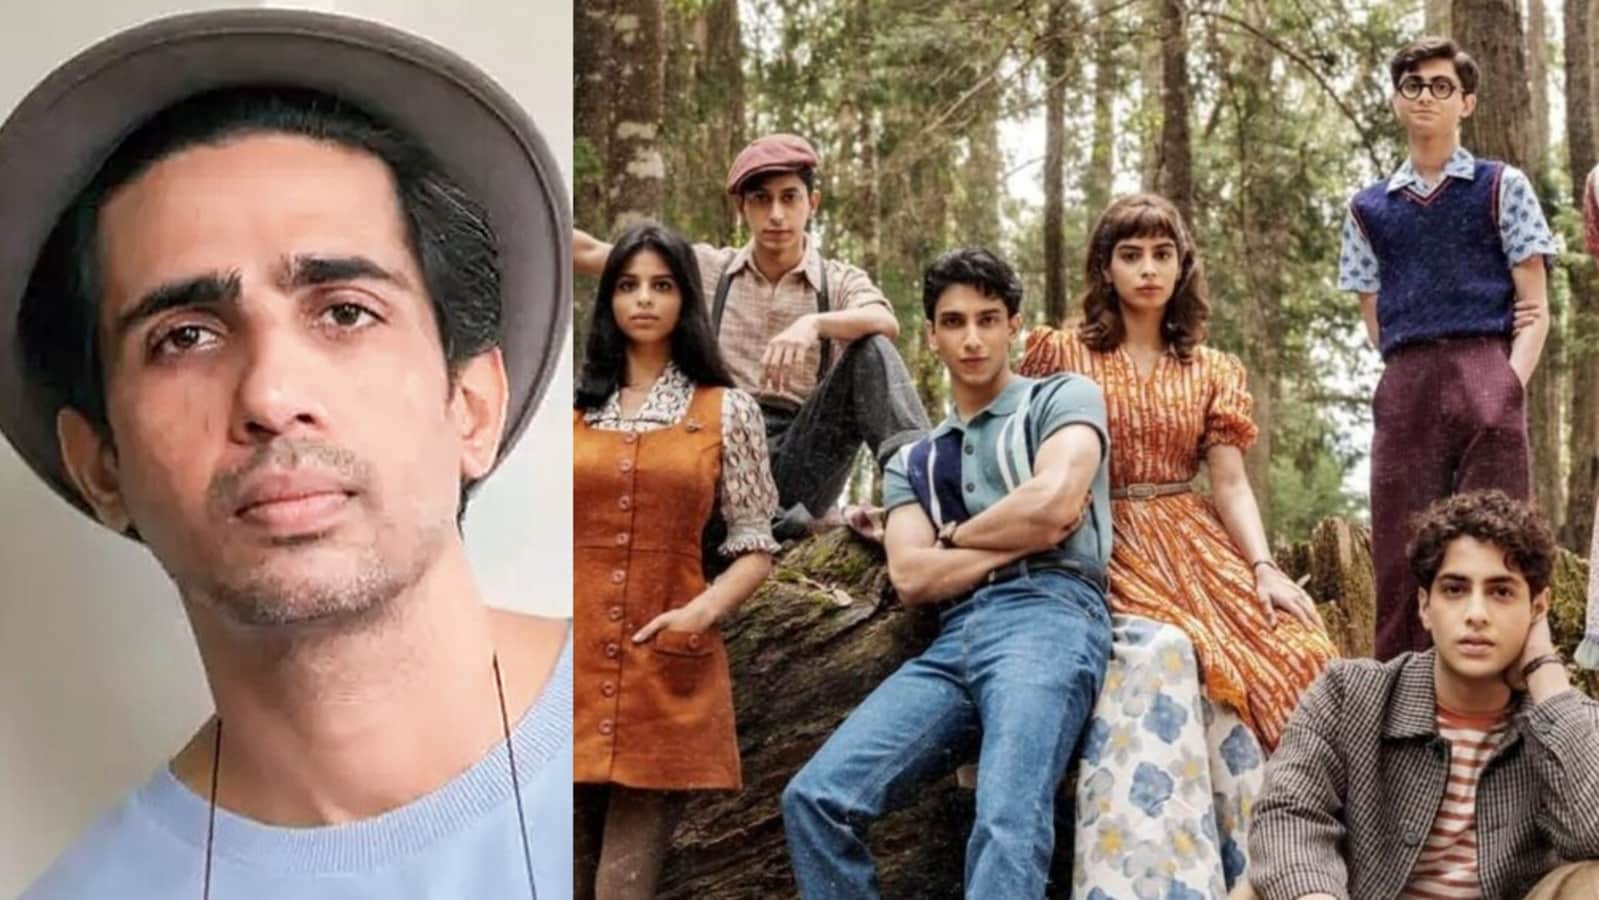 Gulshan Devaiah defends ‘star-kids’ amid nepotism debate after The Archies teaser: ‘Film production is private business’